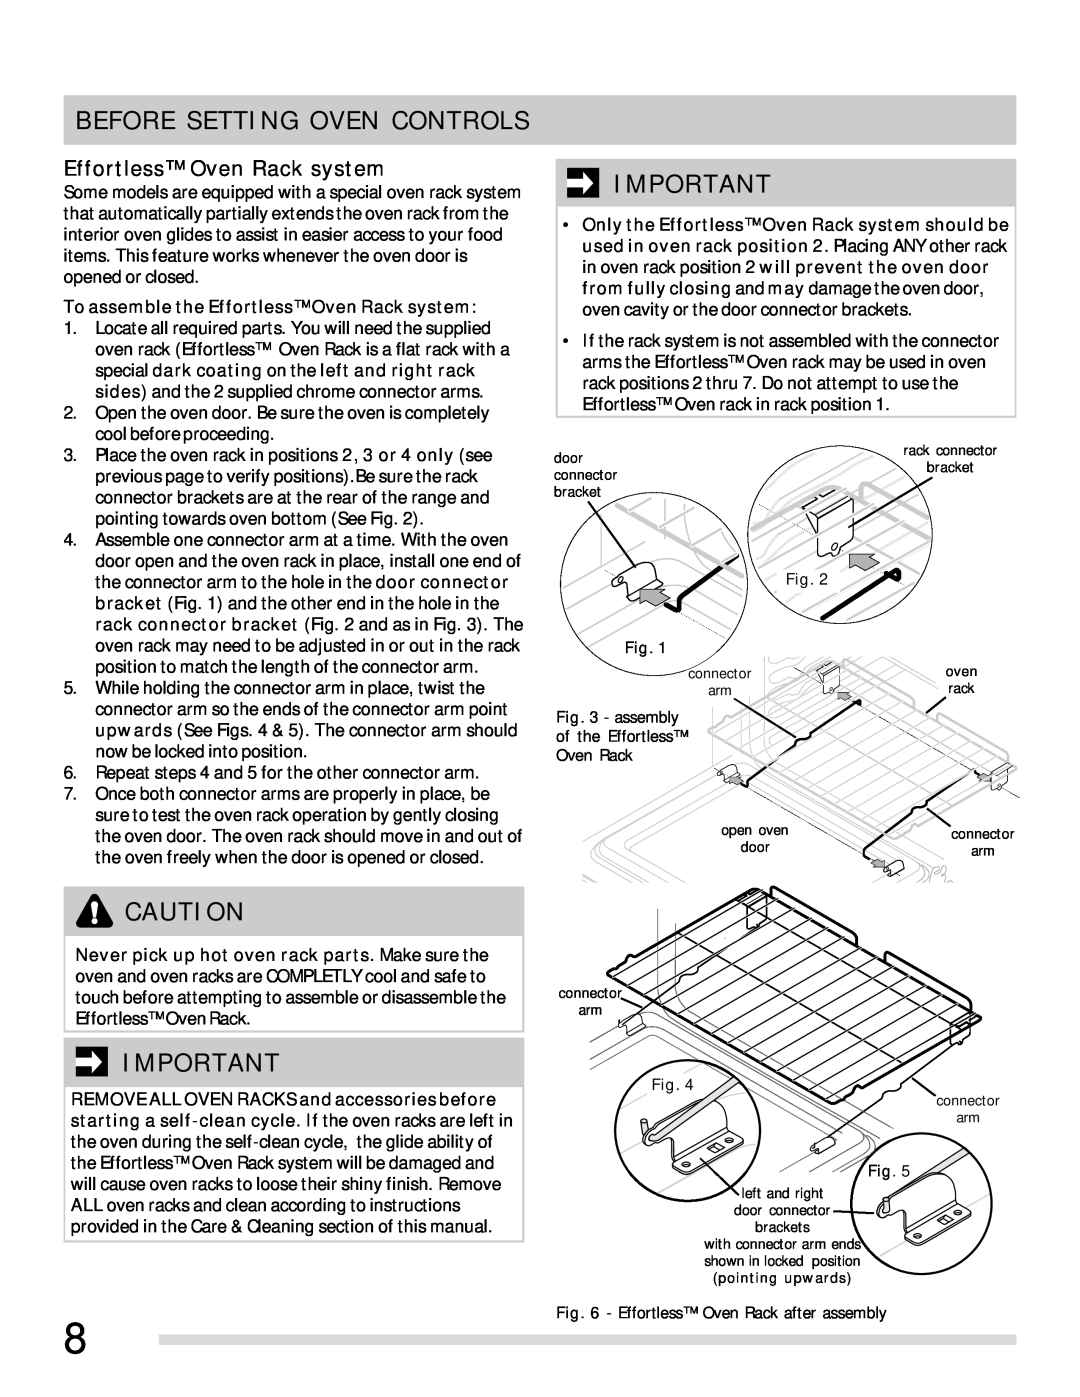 Frigidaire 316902315 important safety instructions Effortless Oven Rack system, Before Setting Oven Controls 